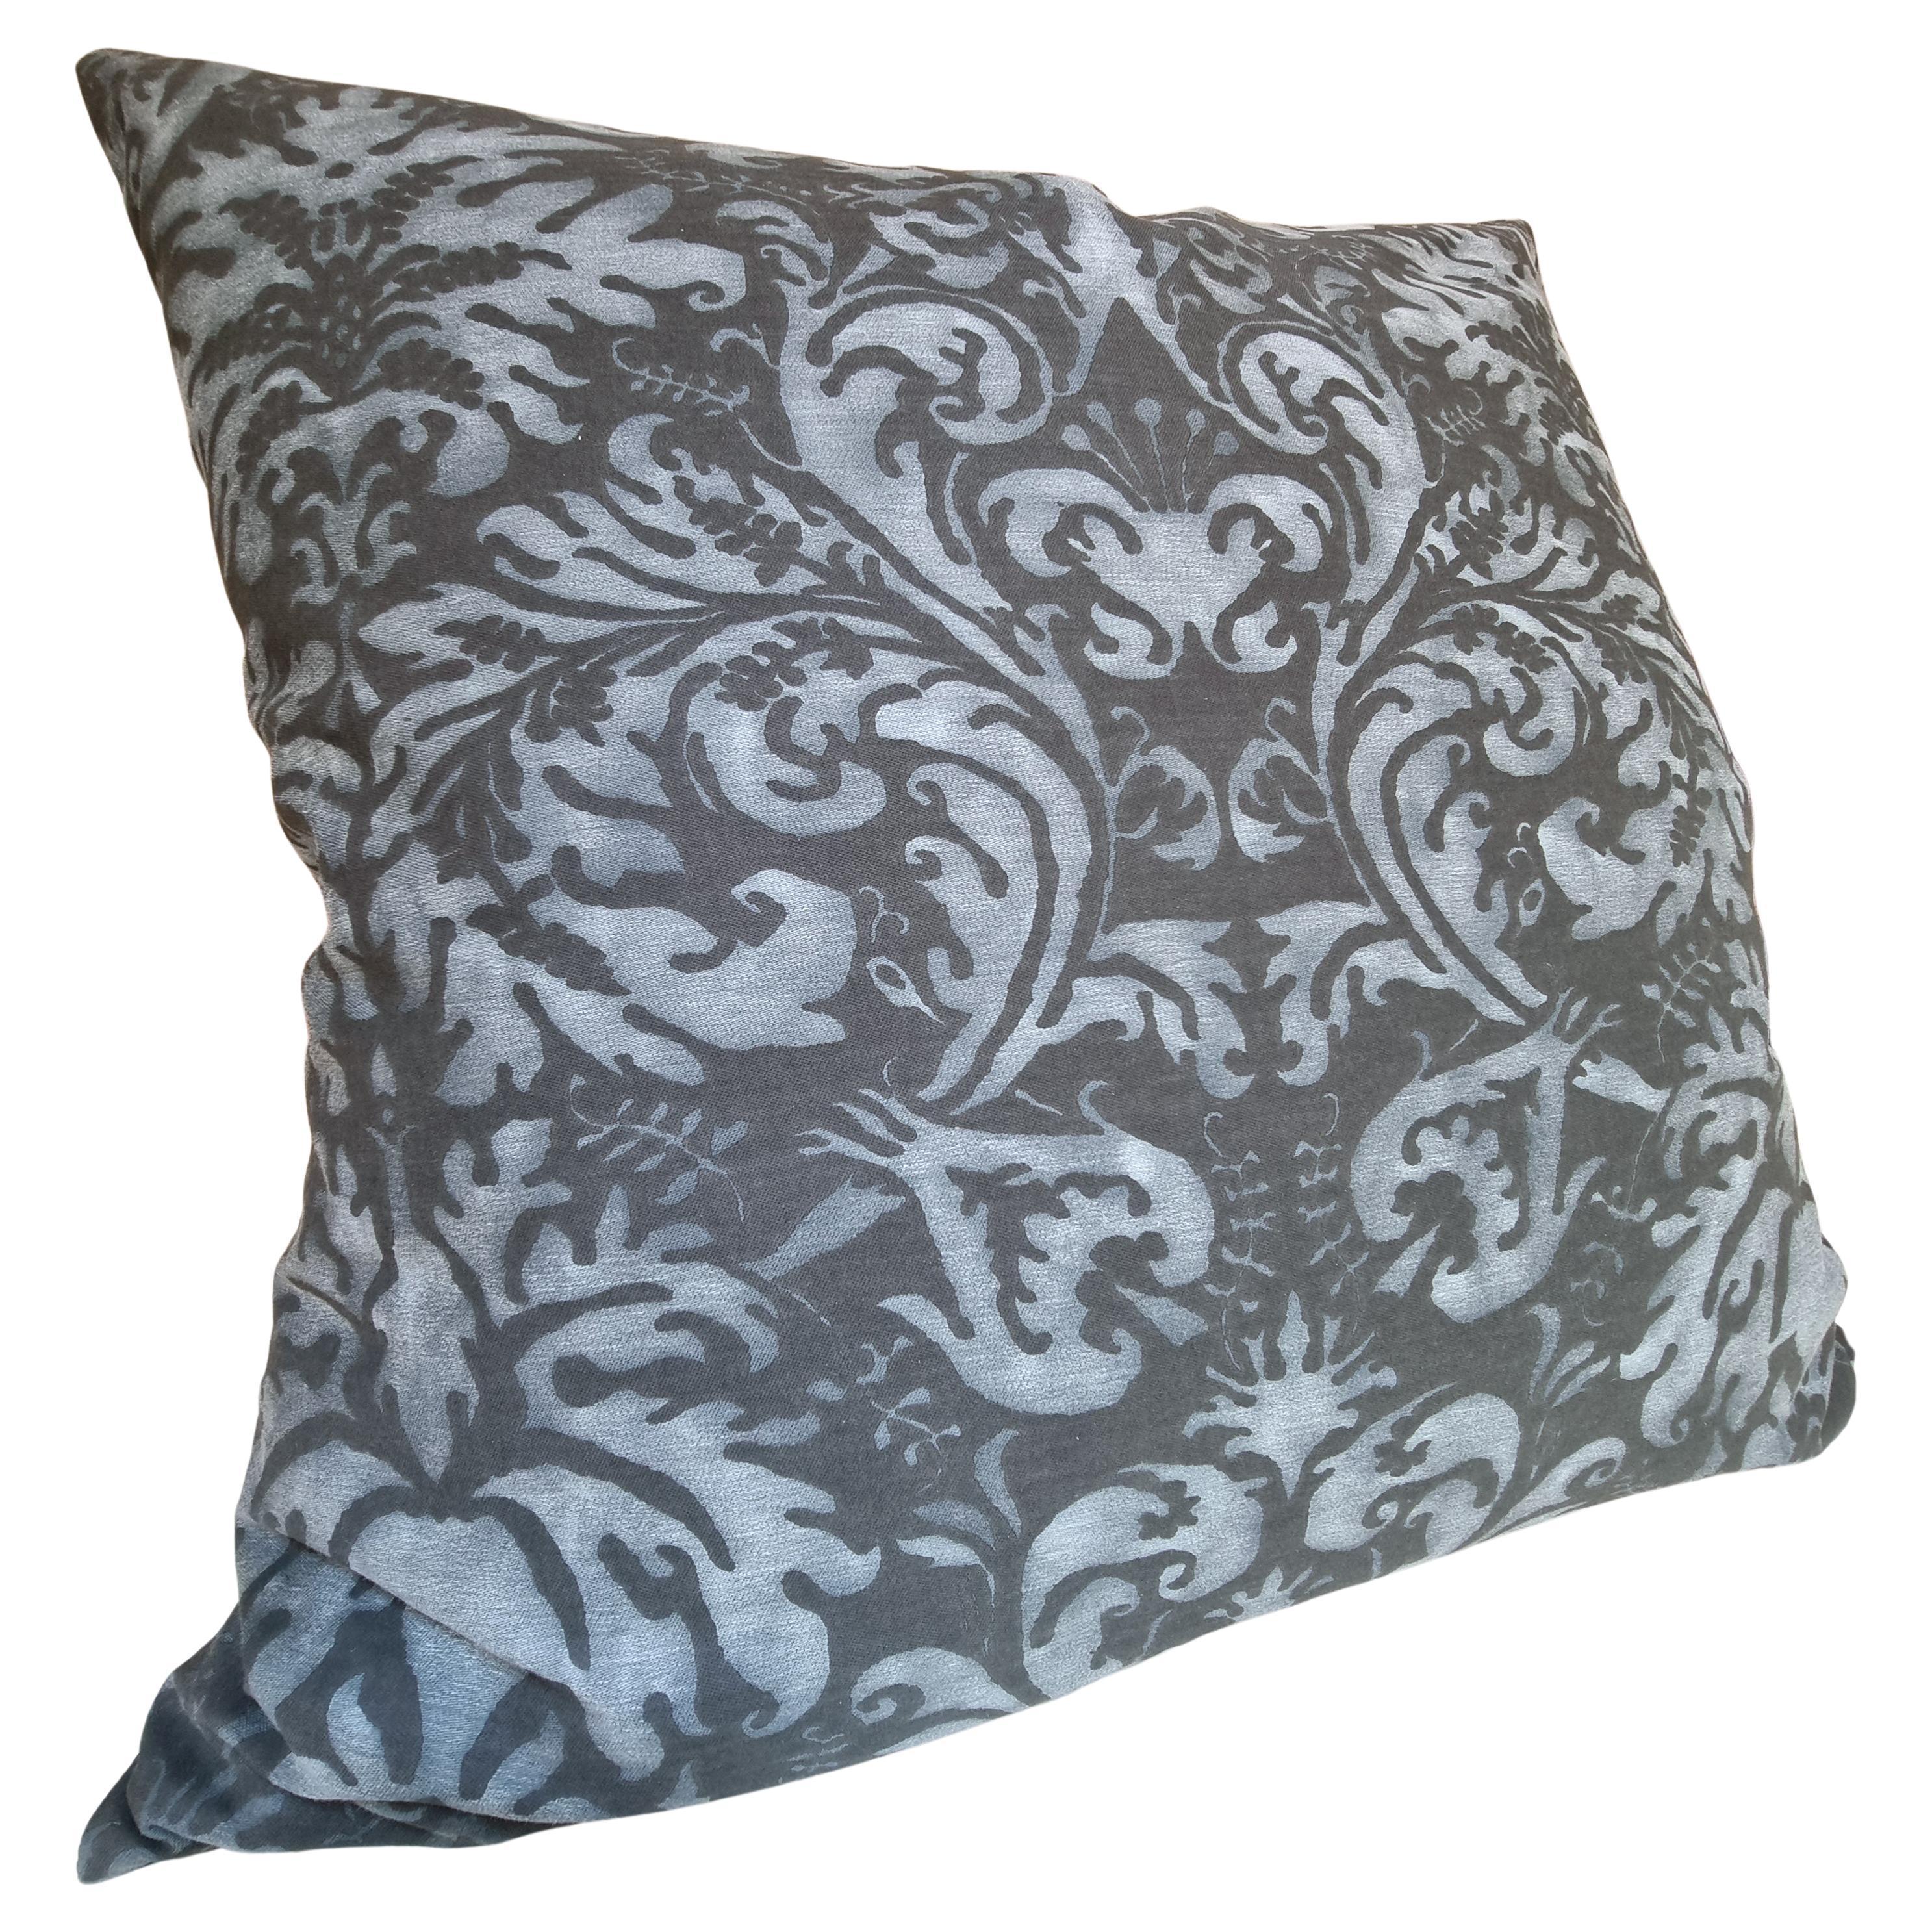 This amazing double-sided throw pillow is handmade using Fortuny fabric Sevres pattern in bistro monotones.
The pillow cover is fully lined, there is an invisible zipper closure at the bottom for easy removal and an insert filled with a sumptuous